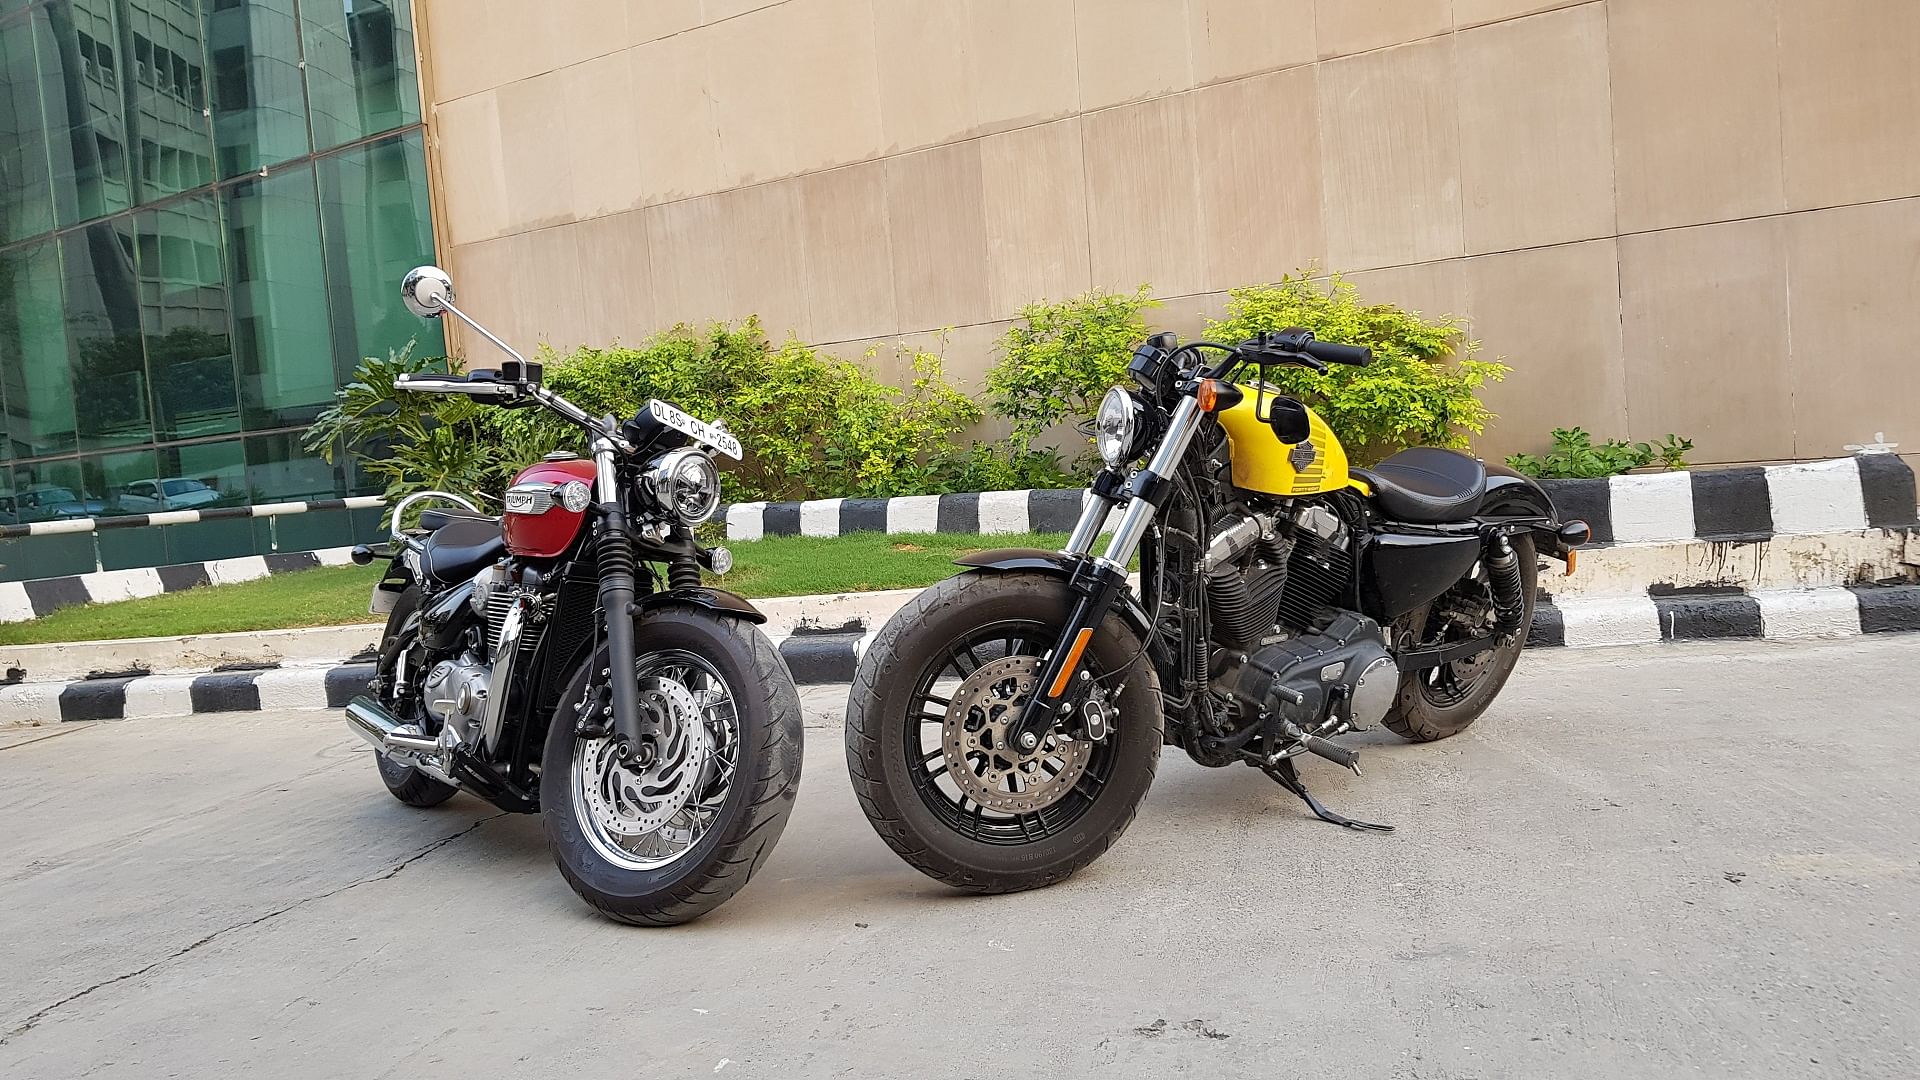 Which is the better cruiser? The Triumph Speedmaster or the Harley-Davidson Forty Eight?